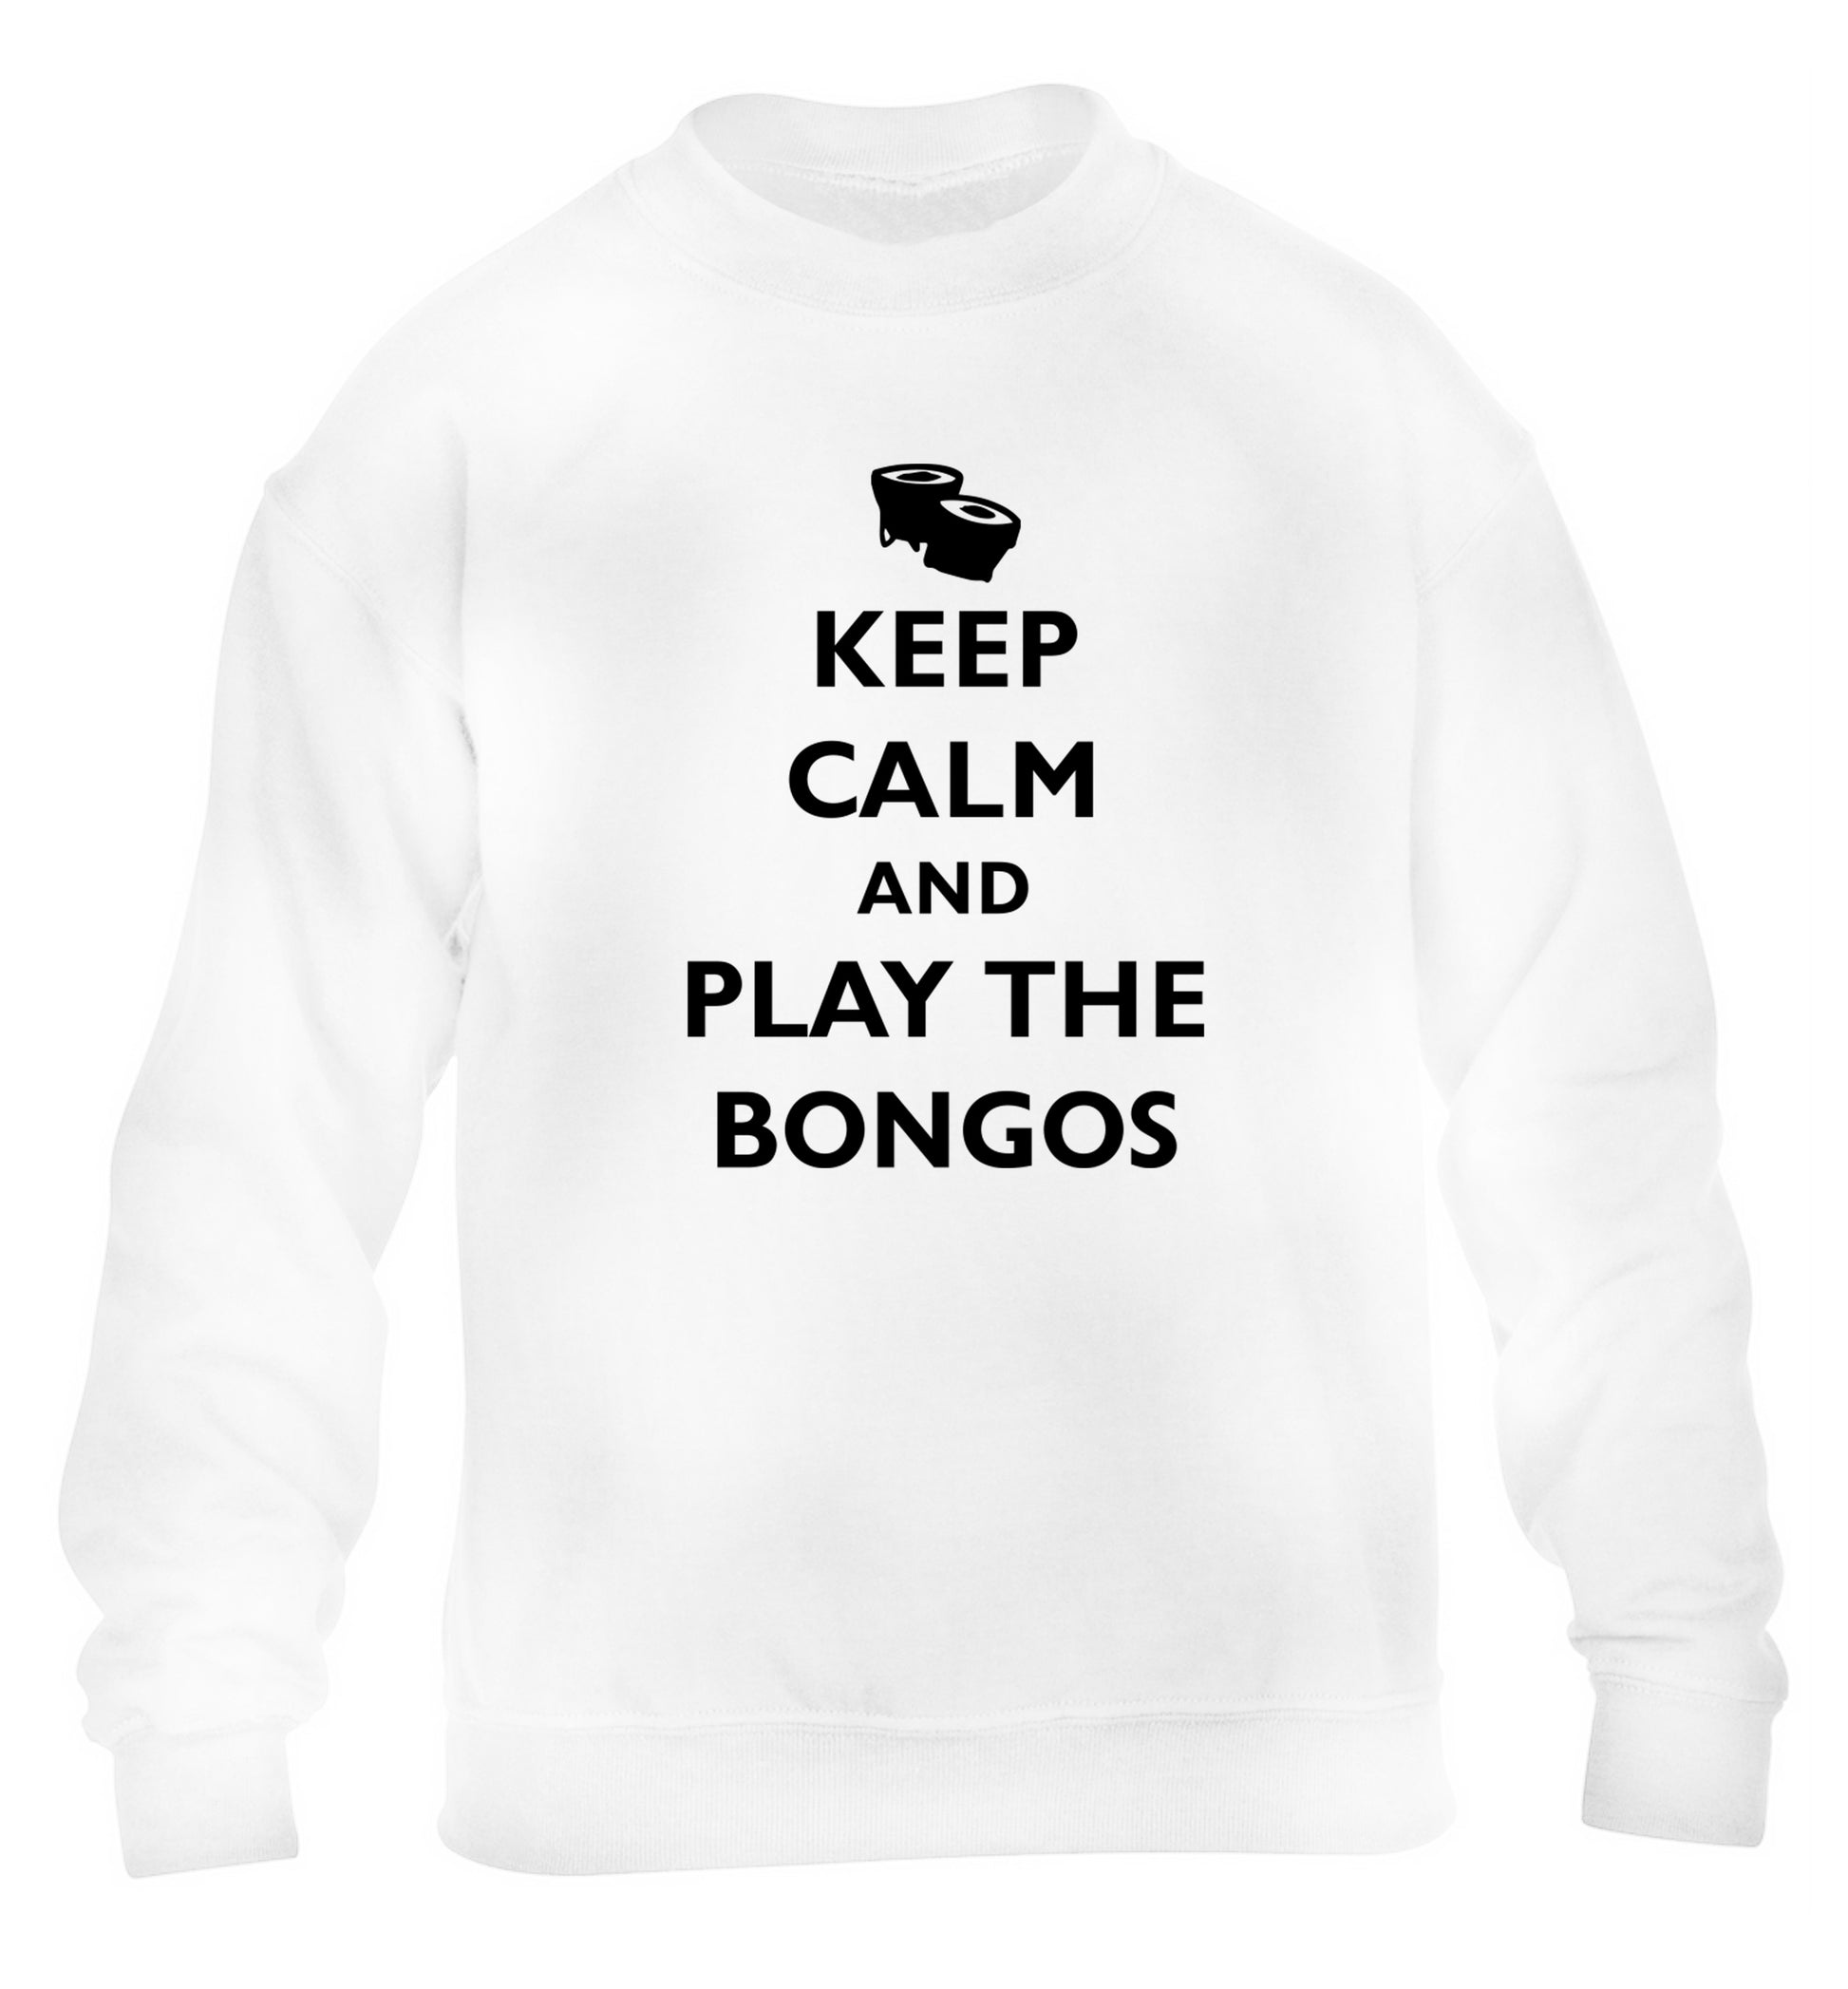 Keep calm and play the bongos children's white sweater 12-14 Years